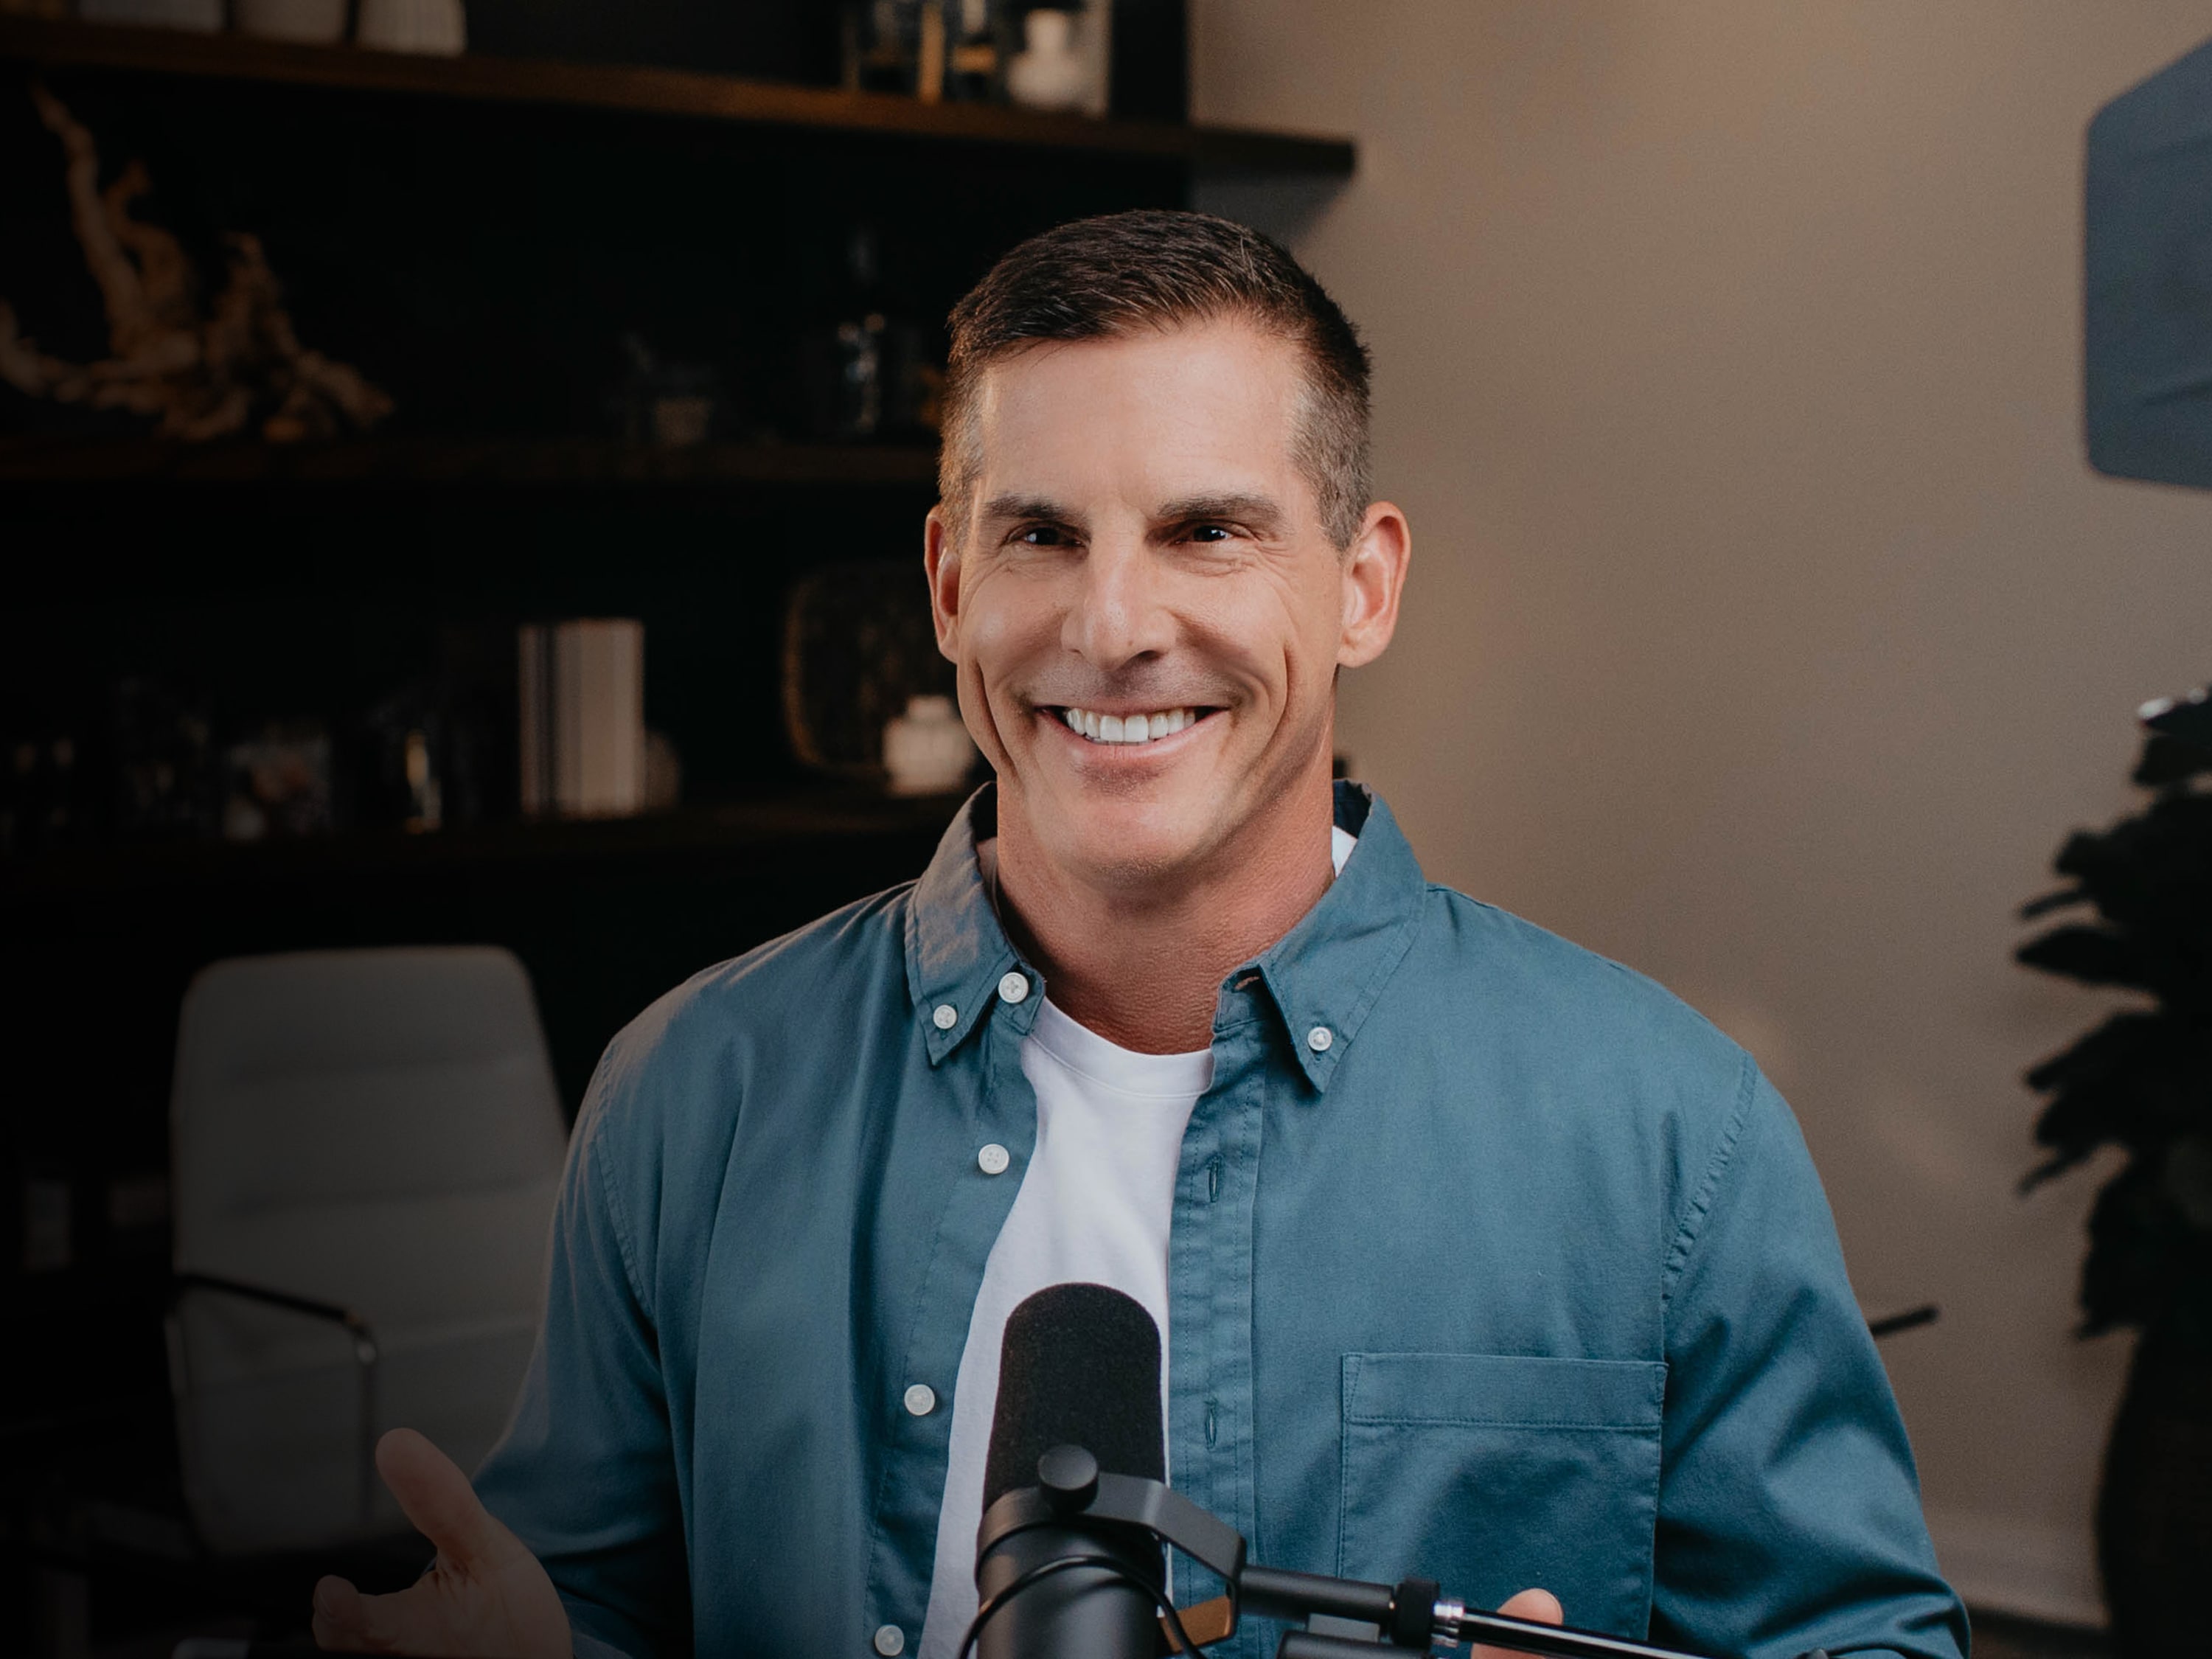 Smiling Craig Groeschel wearing a blue long sleeves and white shirt in front of a mic